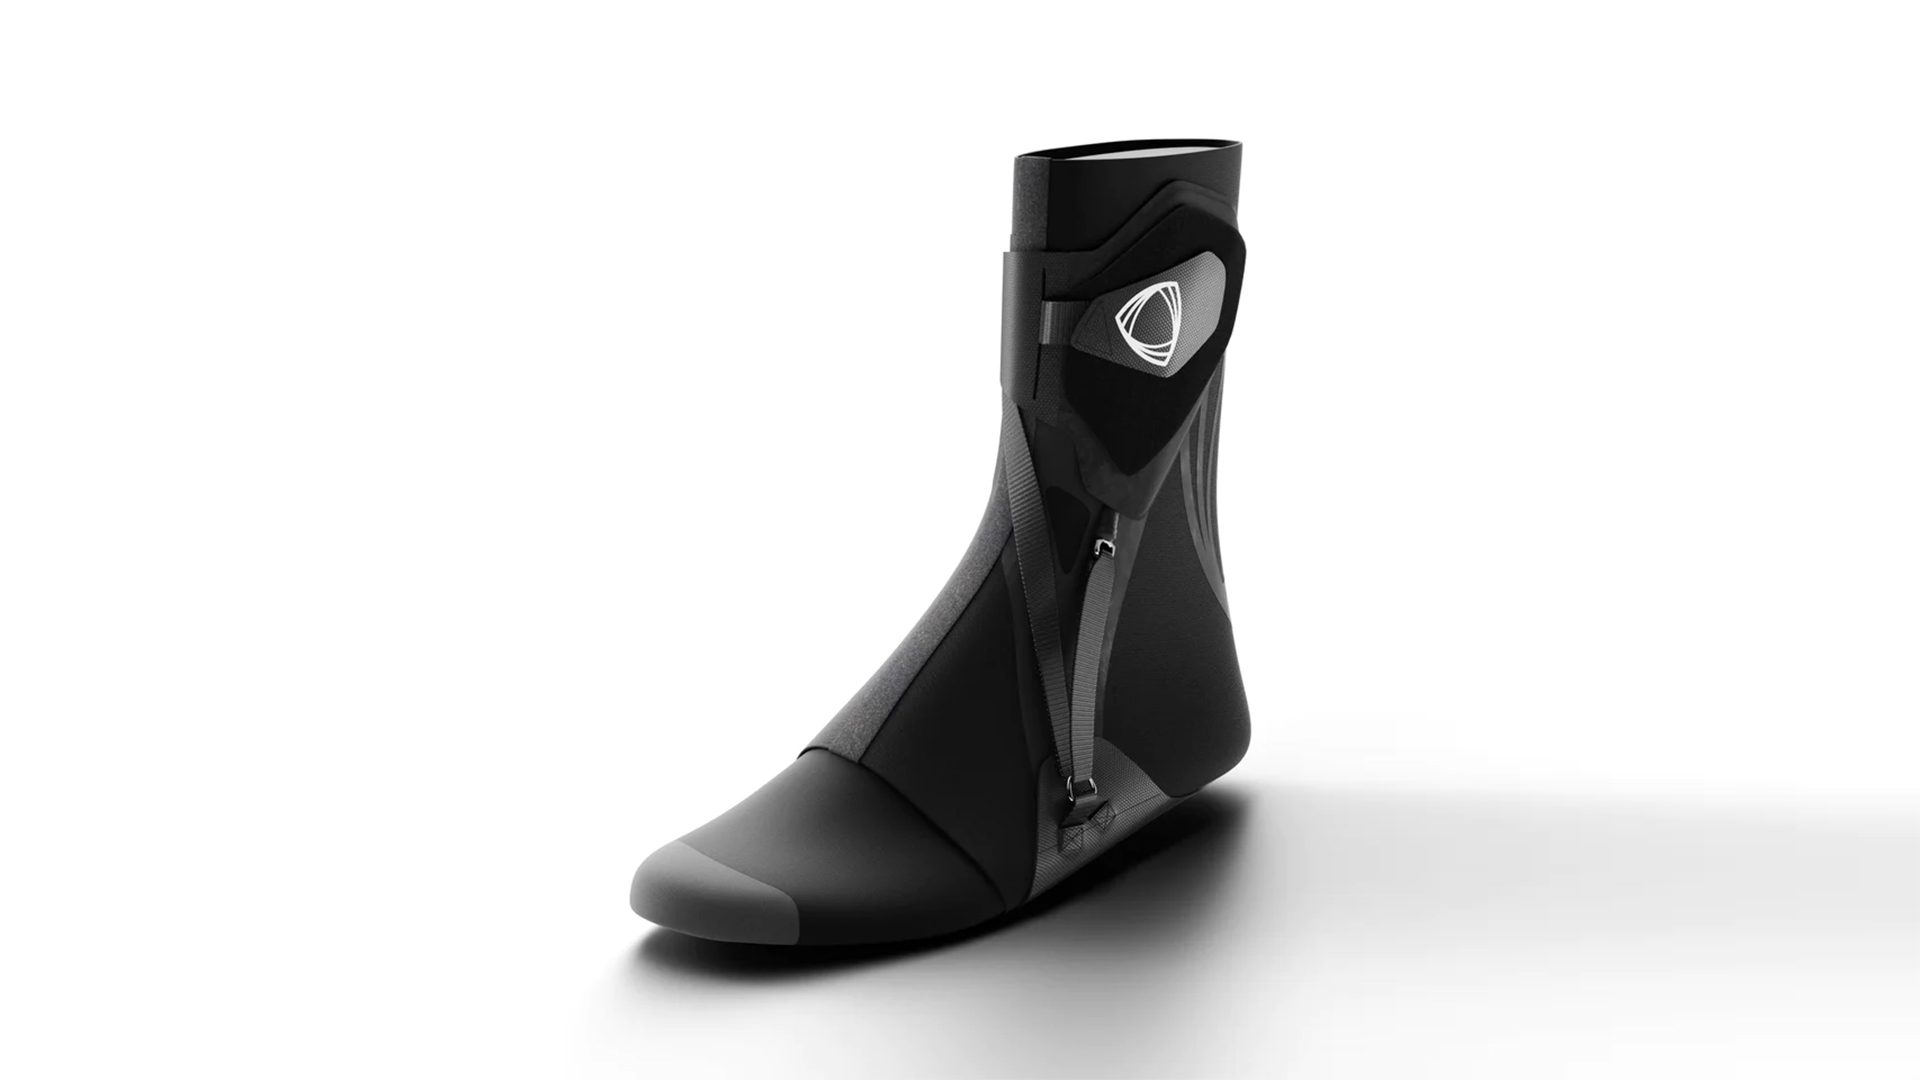 Award-Winning Ankle Brace is Now Available in the U.S. - TOMORROW’S ...